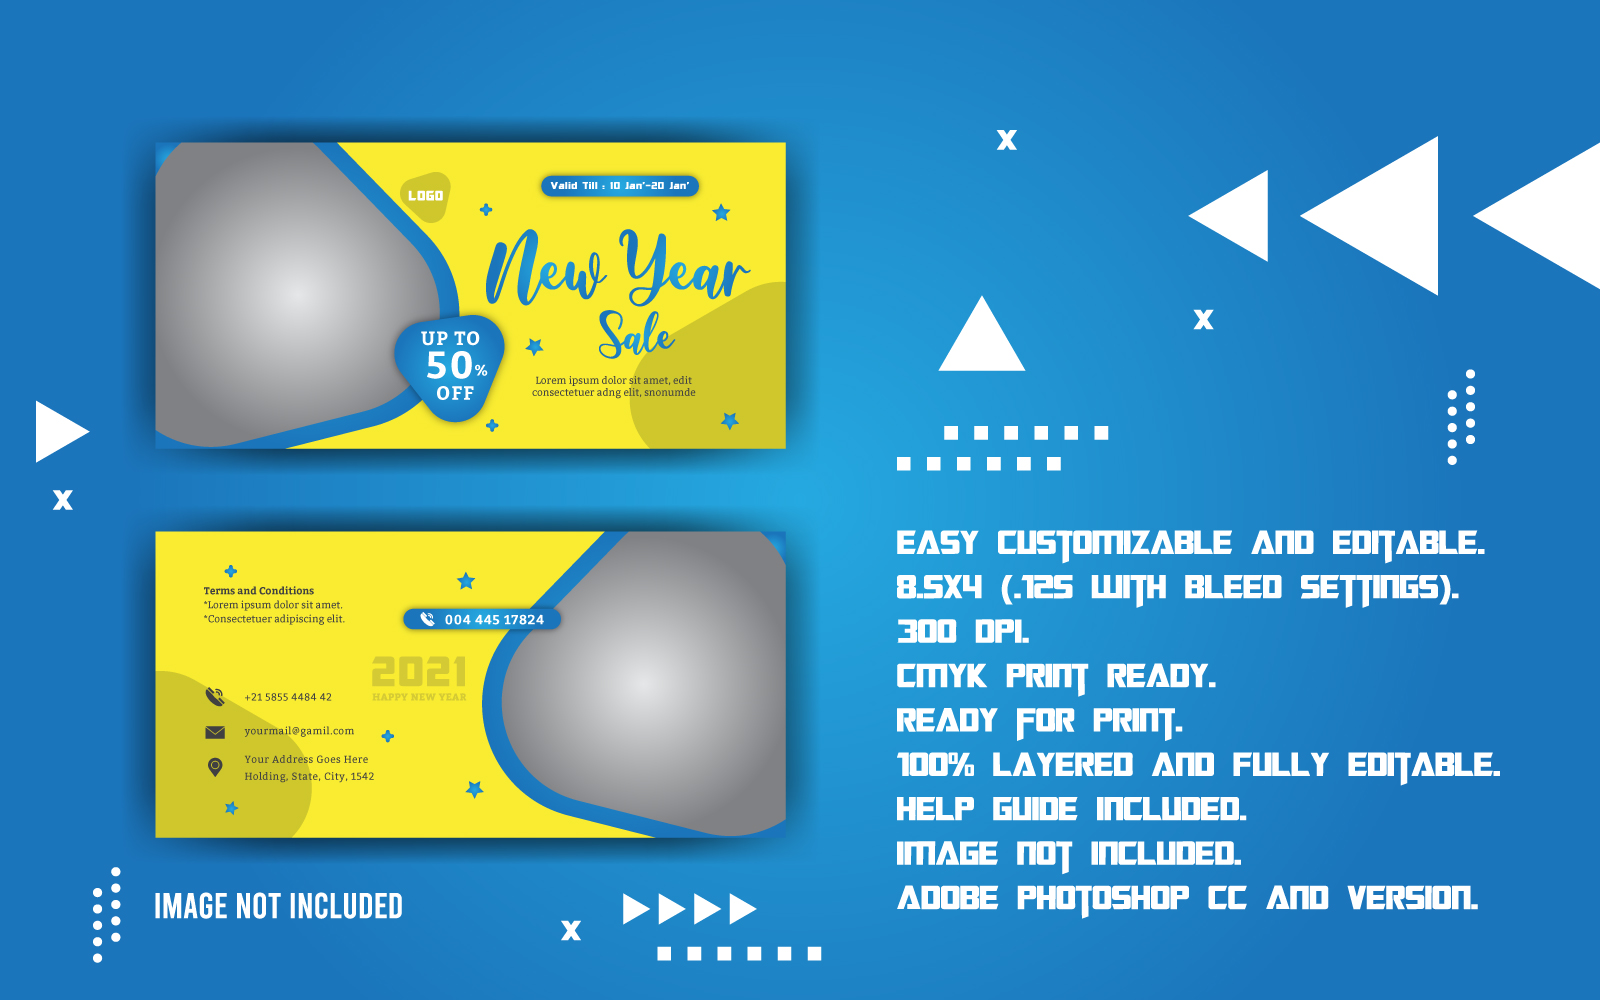 New Year Promotional Sale Voucher - Corporate Identity Template